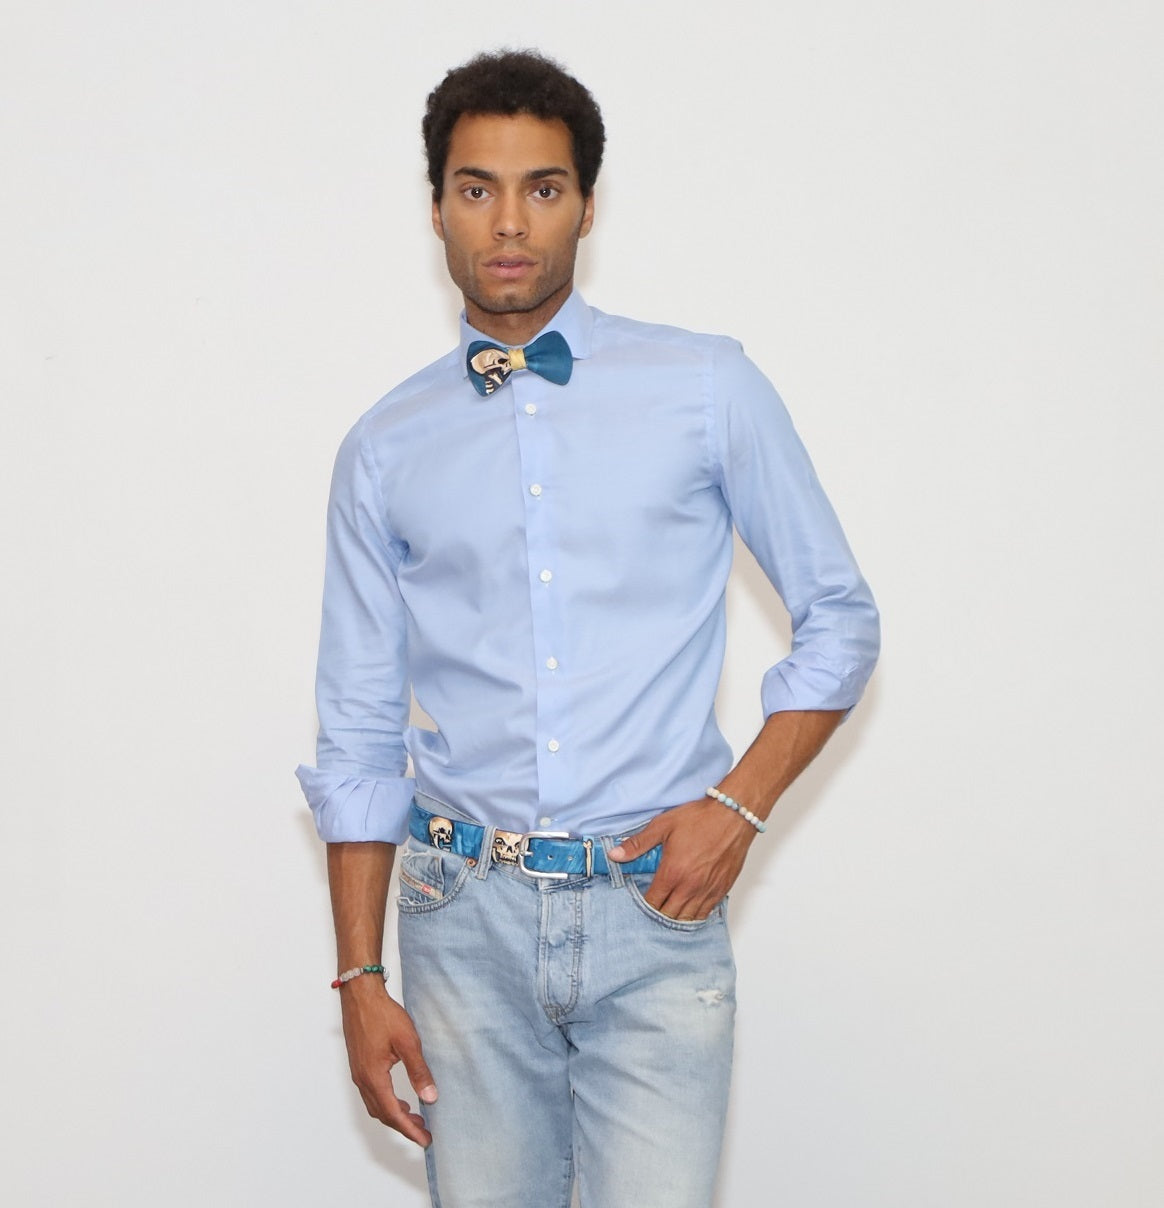 our model wearing light blue pants and a light blue shirt with painted bow tie and belt in a white background